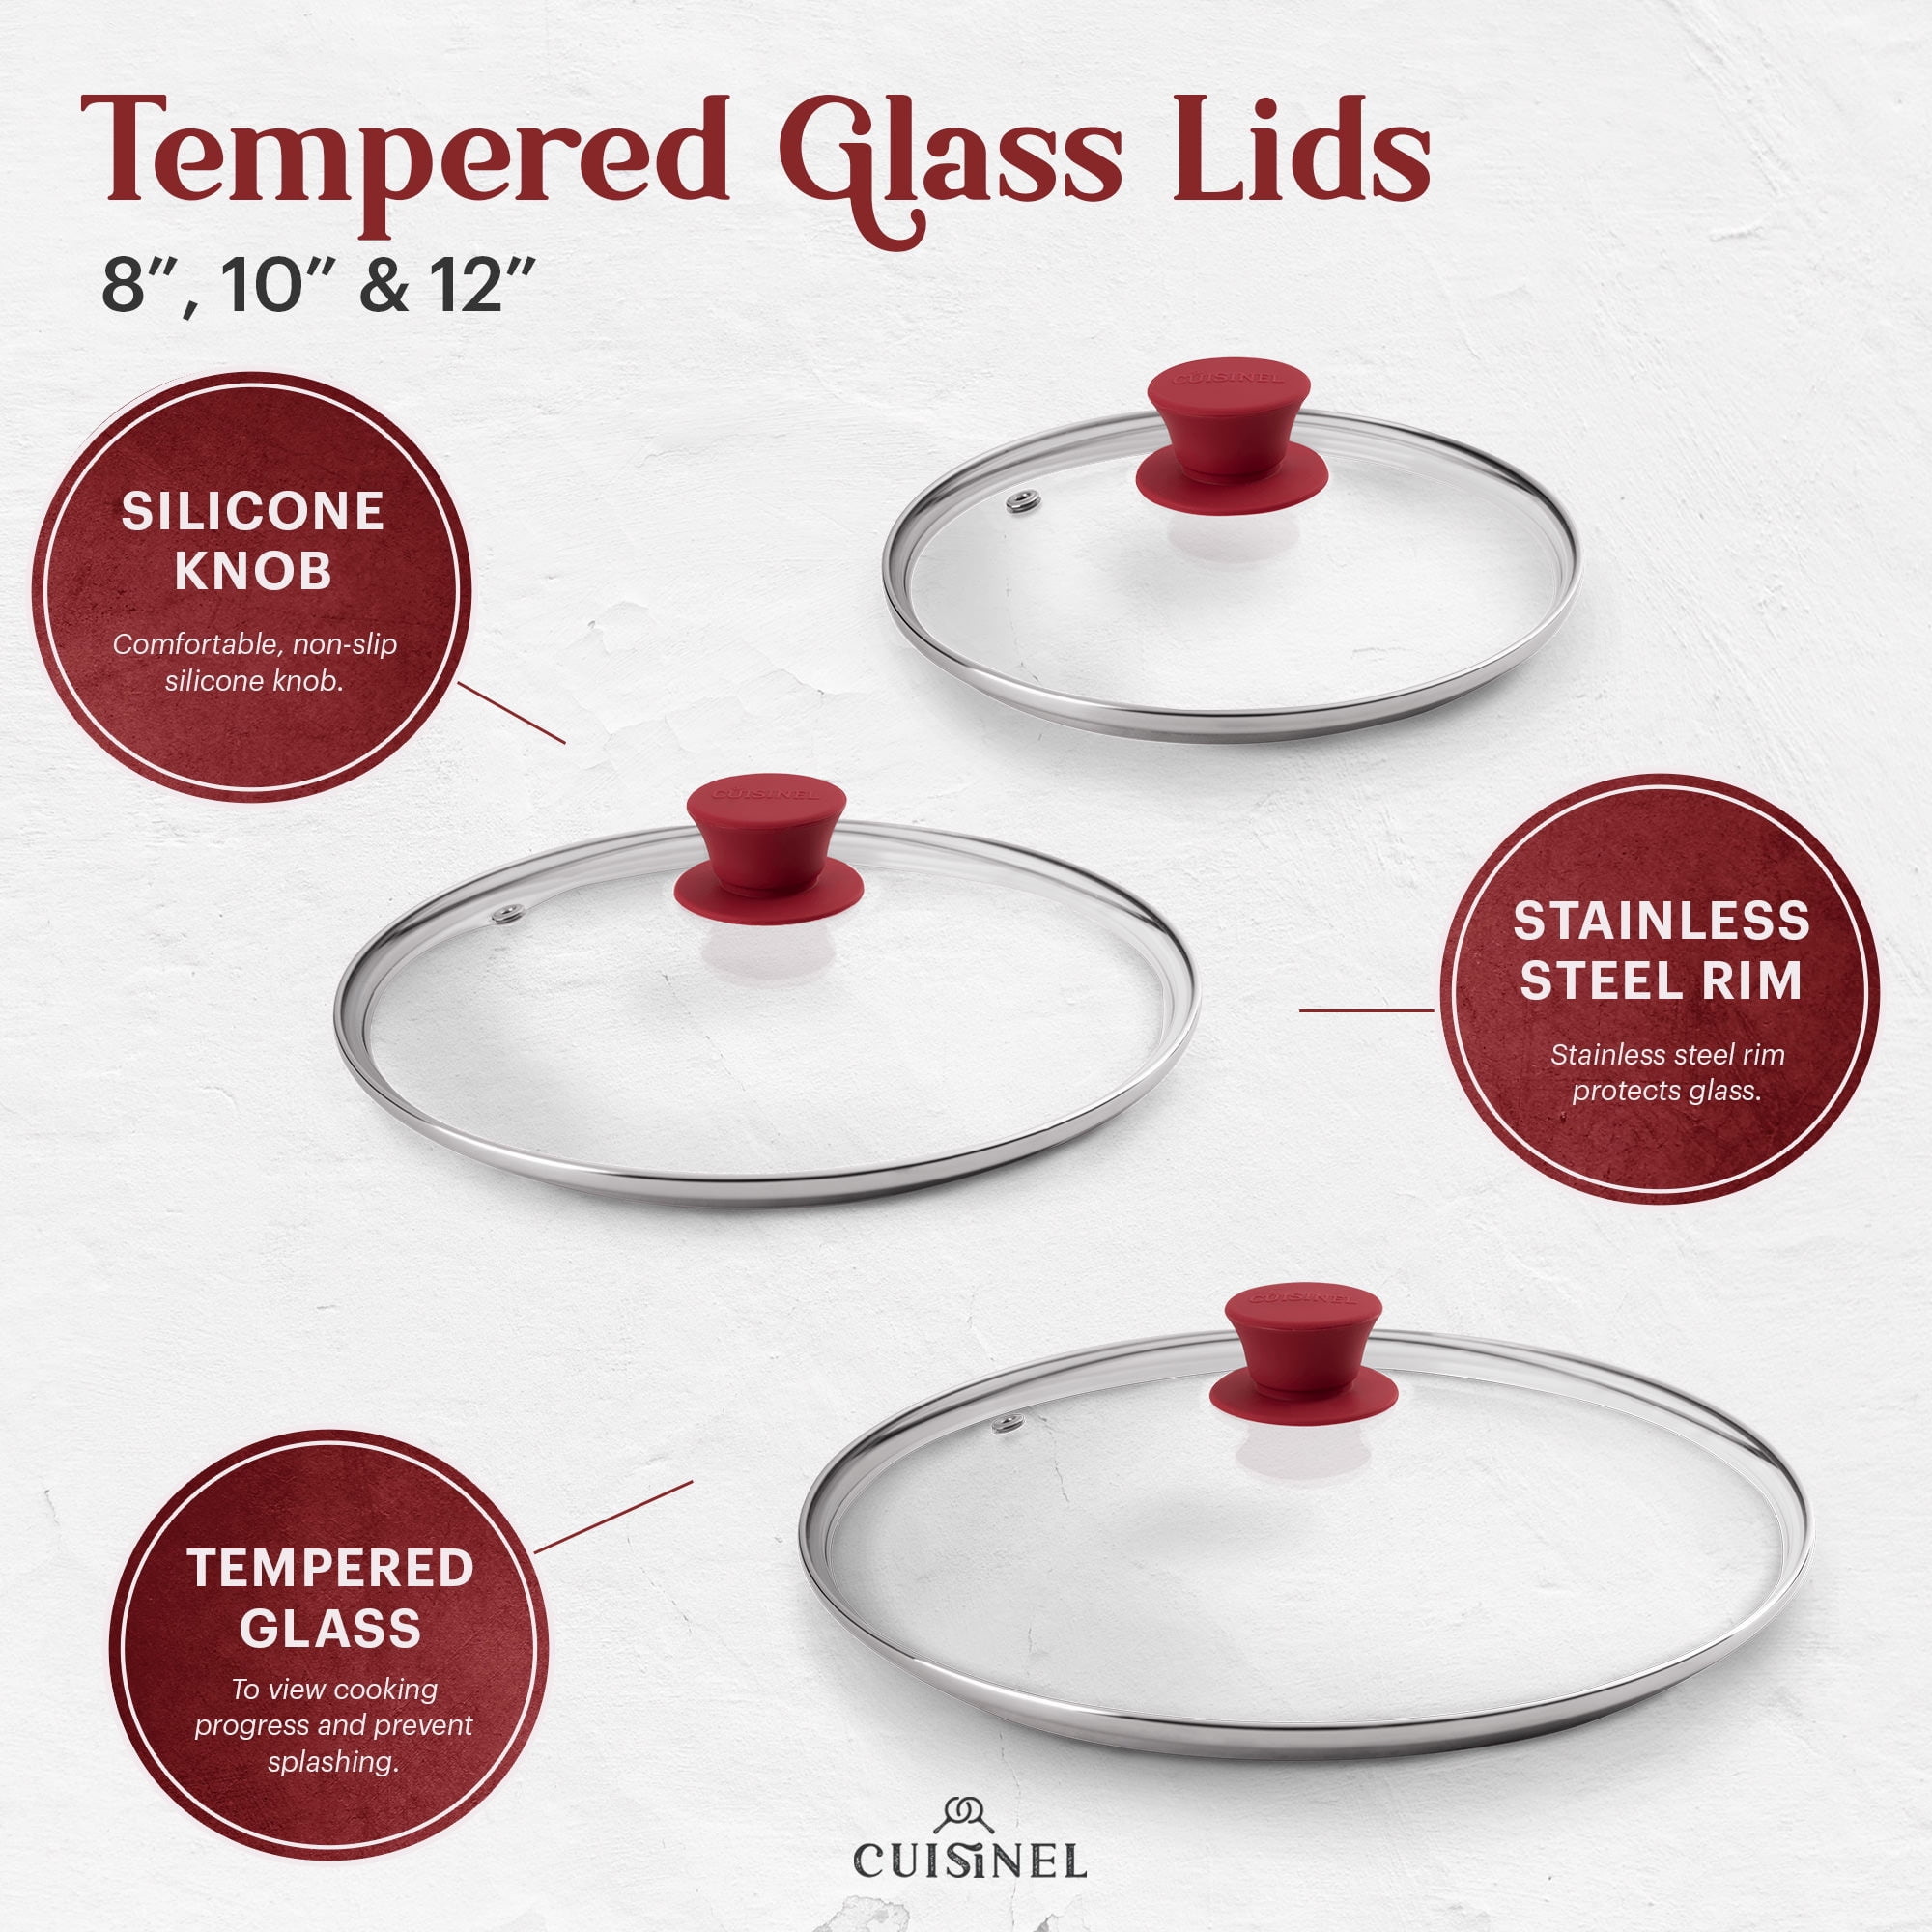 Glass Lids Set - 10 + 12-Inch / 25.4cm+30.48cm / 264mm + 308mm -  Compatible with Lodge Cast Iron - Fully Assembled Tempered Replacement  Cover - Oven